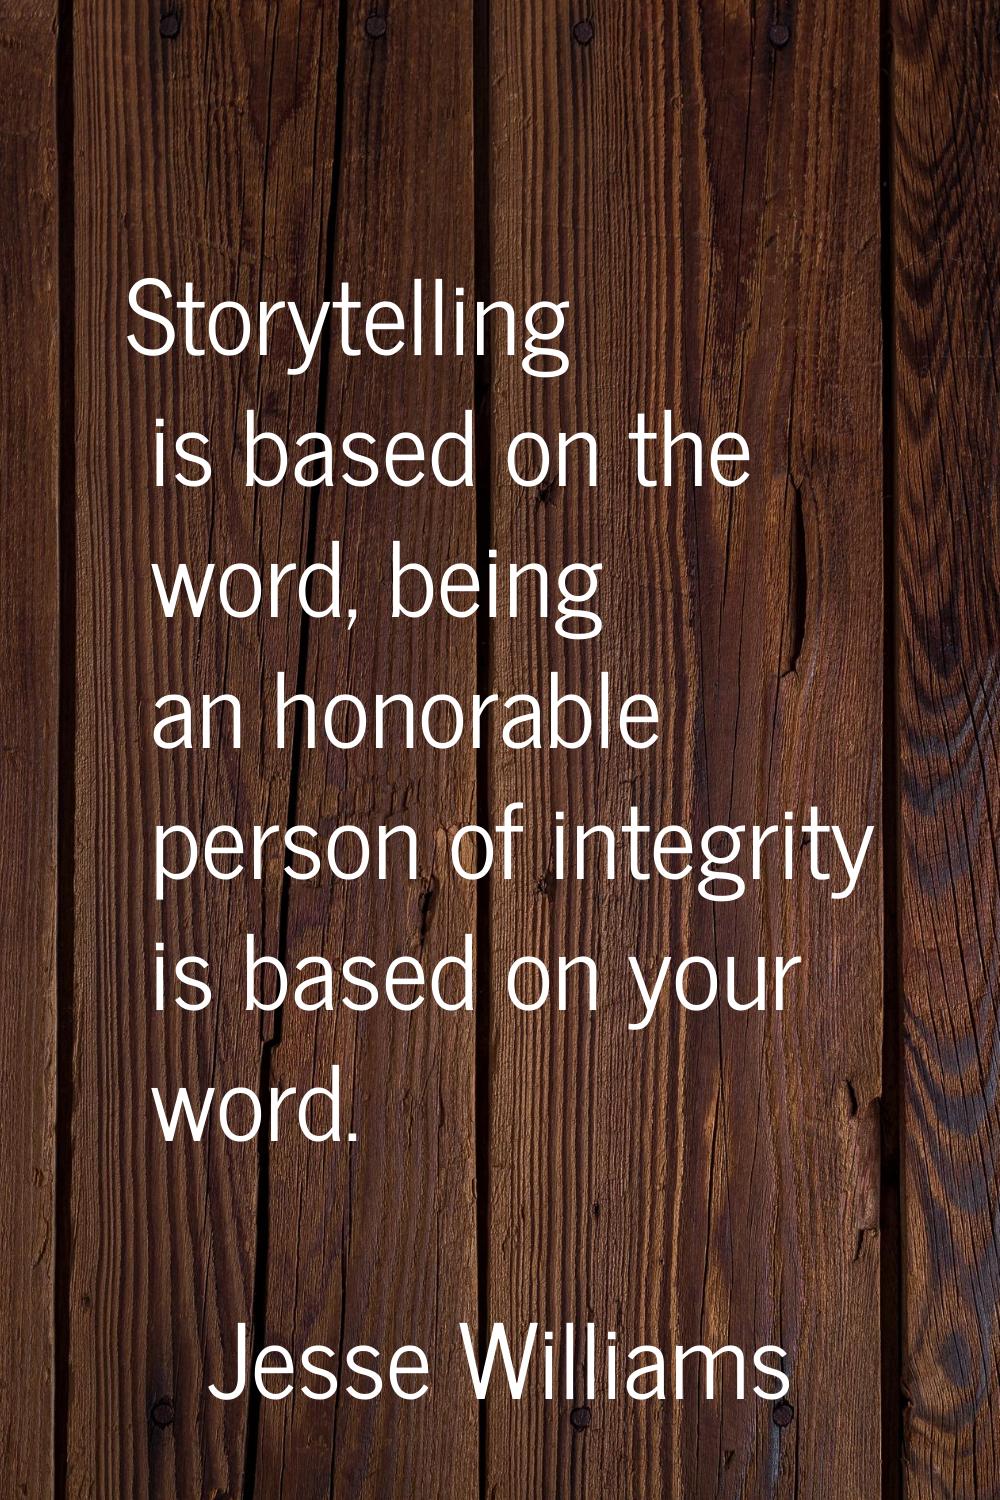 Storytelling is based on the word, being an honorable person of integrity is based on your word.